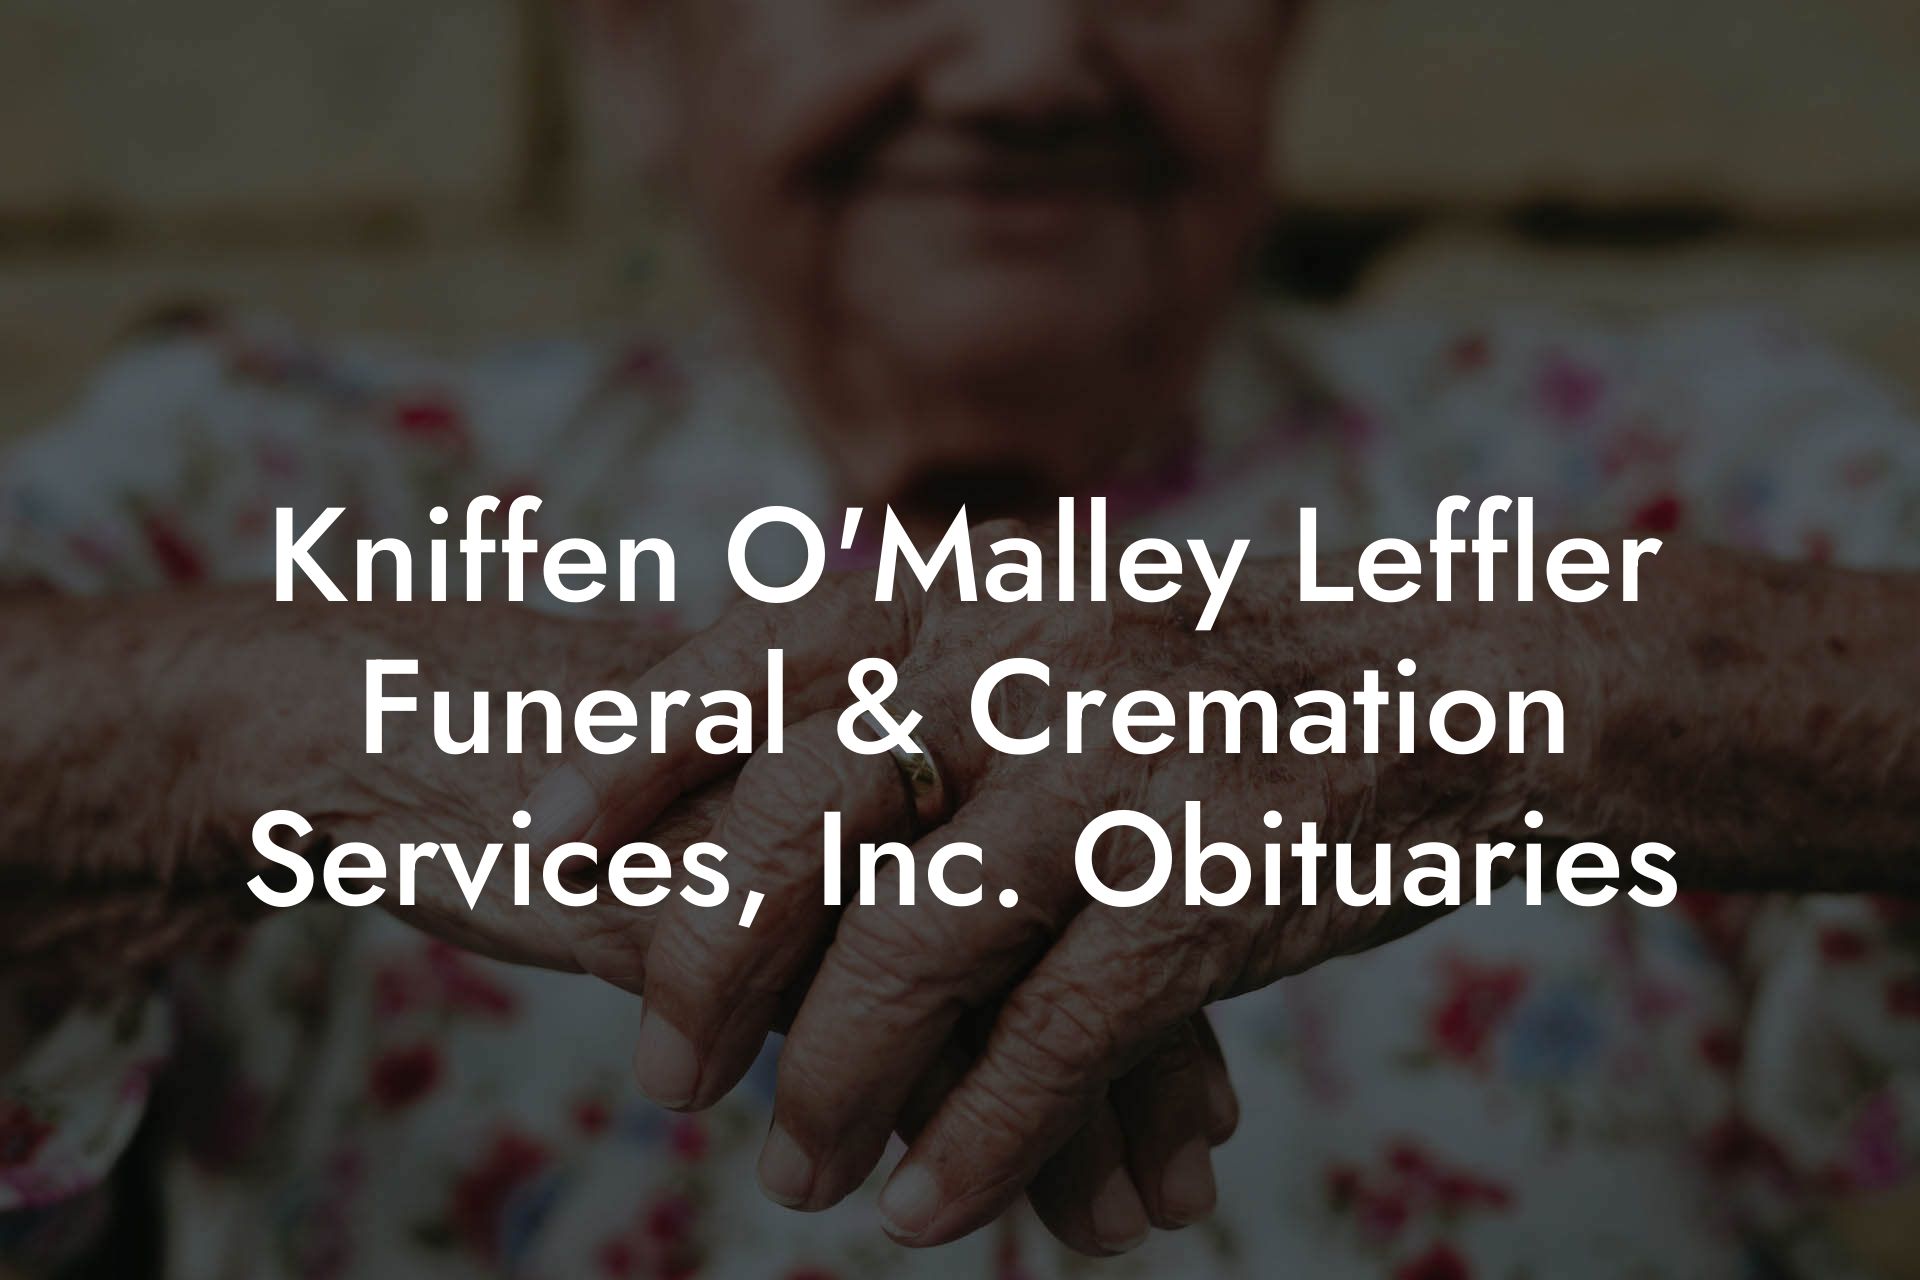 Kniffen O'Malley Leffler Funeral & Cremation Services, Inc. Obituaries